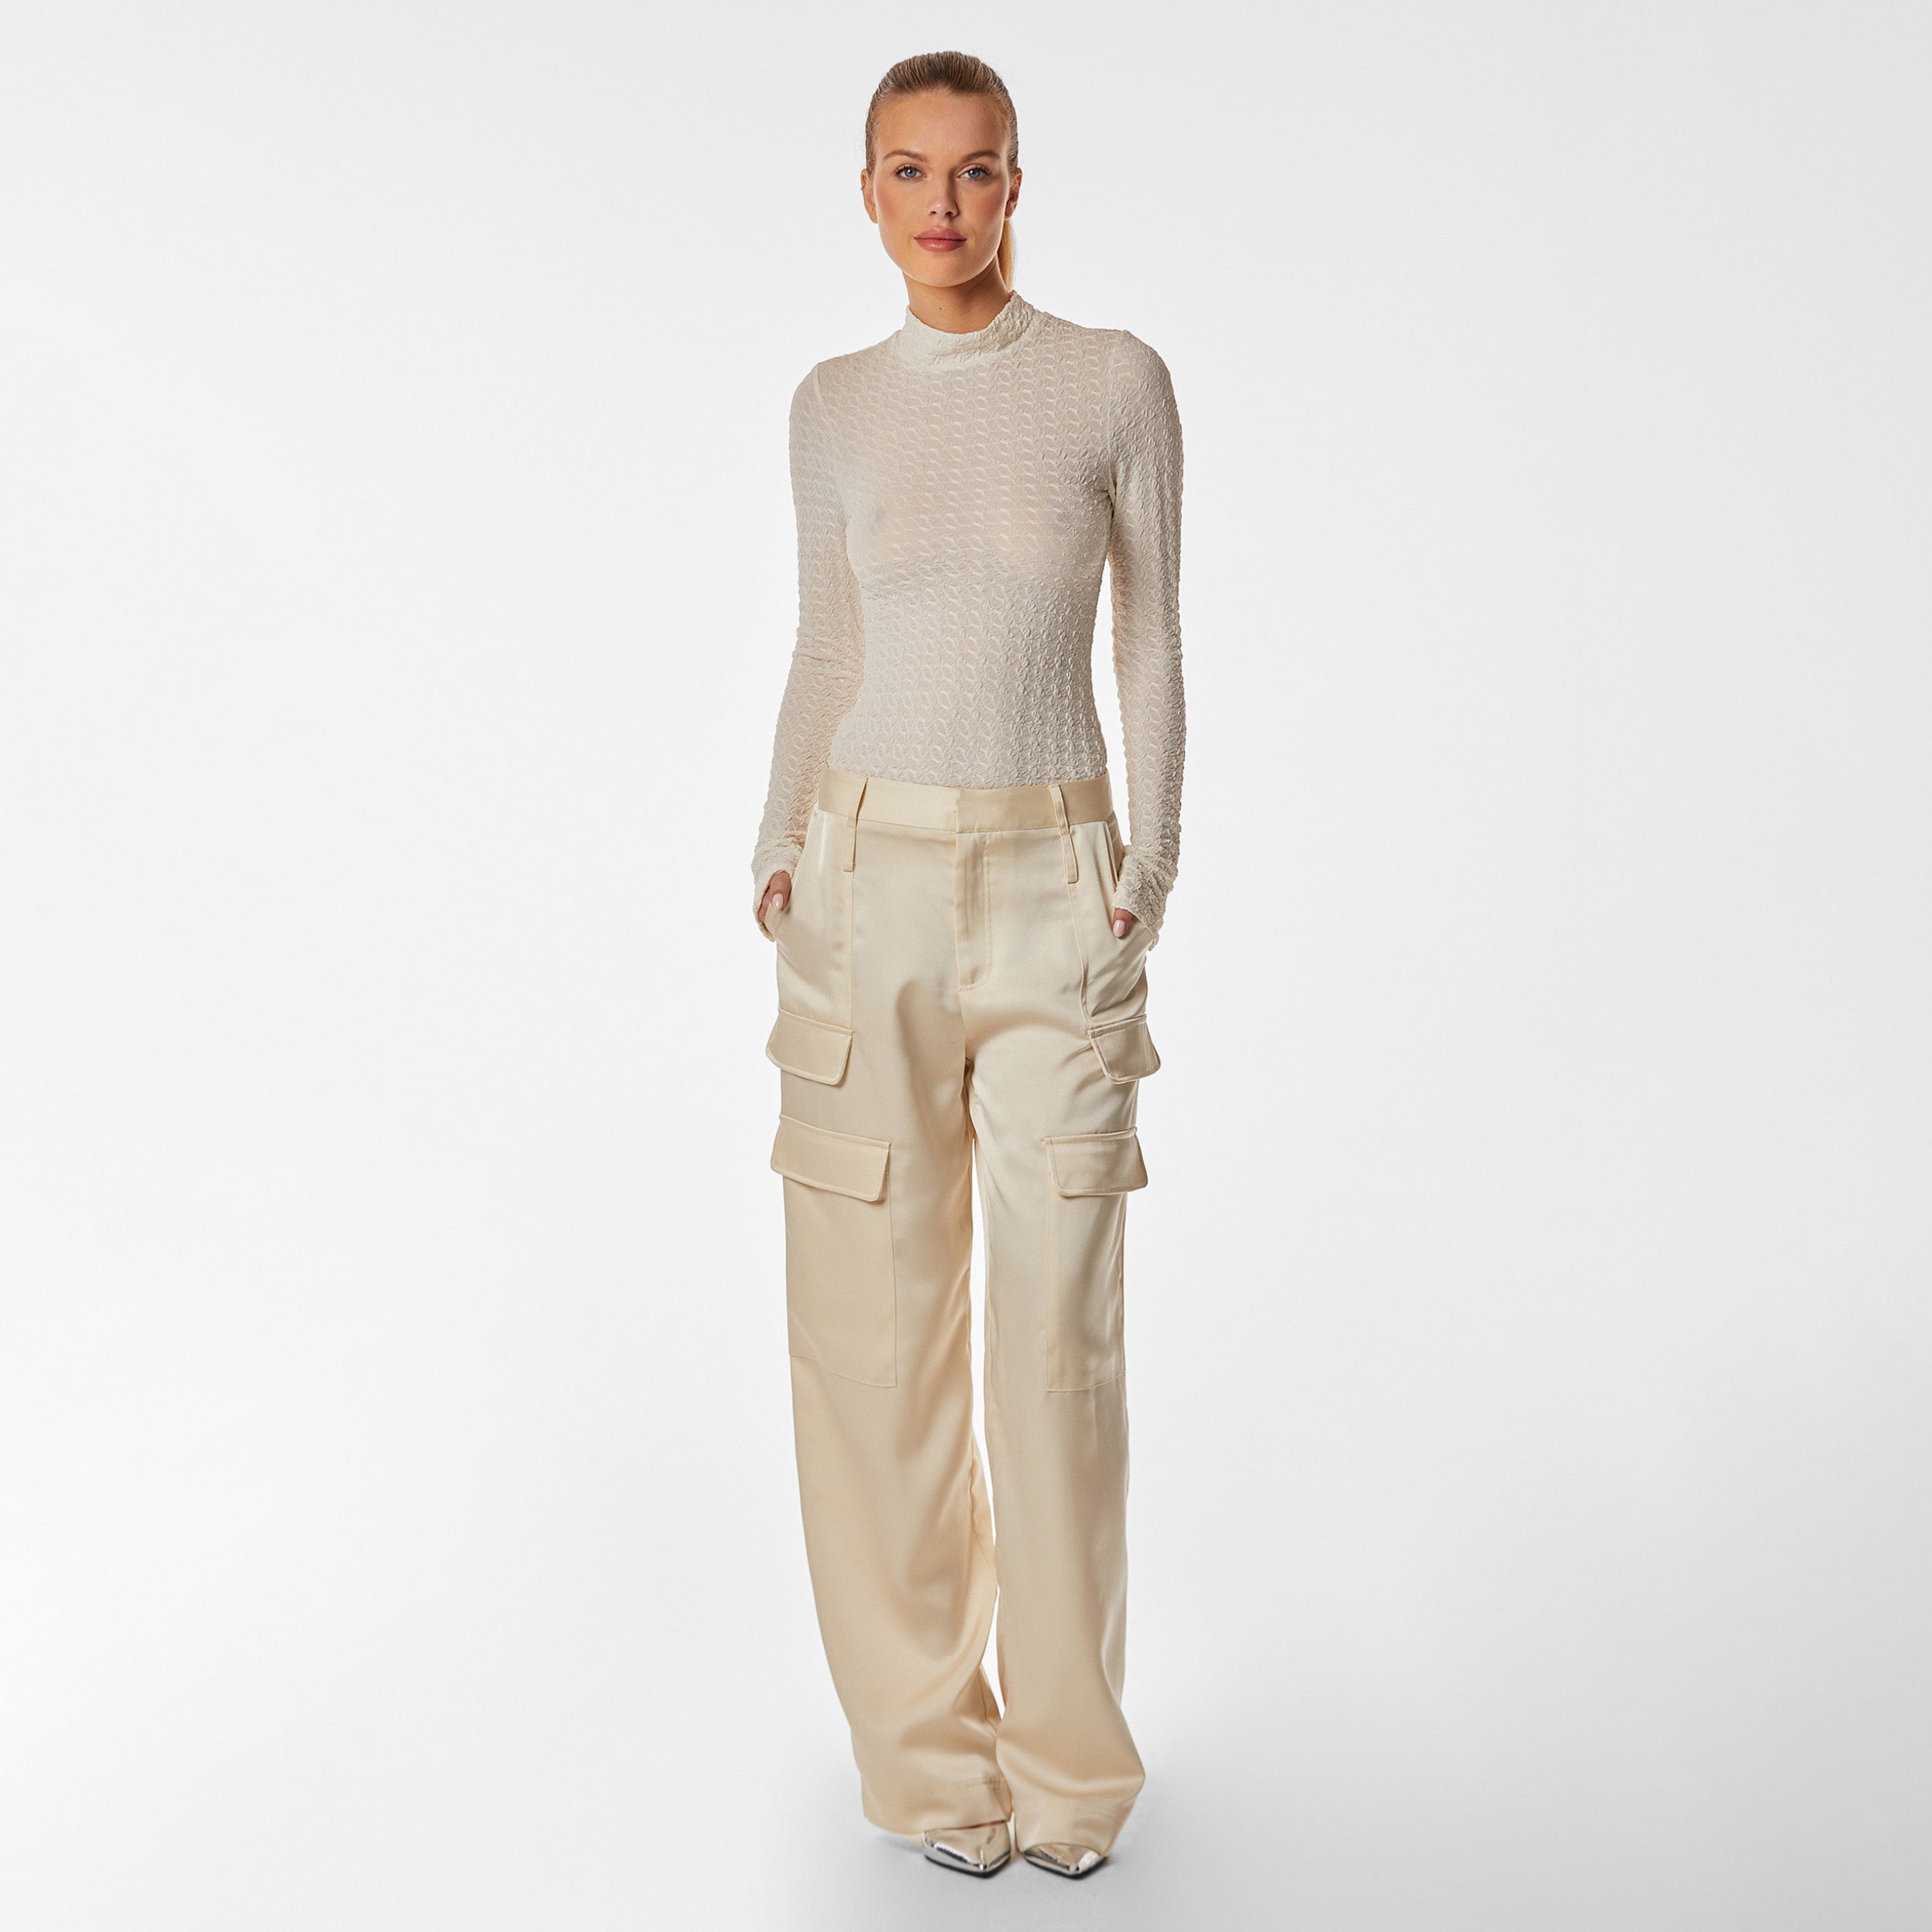 Woman wearing ivory stretch mesh textured turtleneck sweater and pearl satin cargo pant